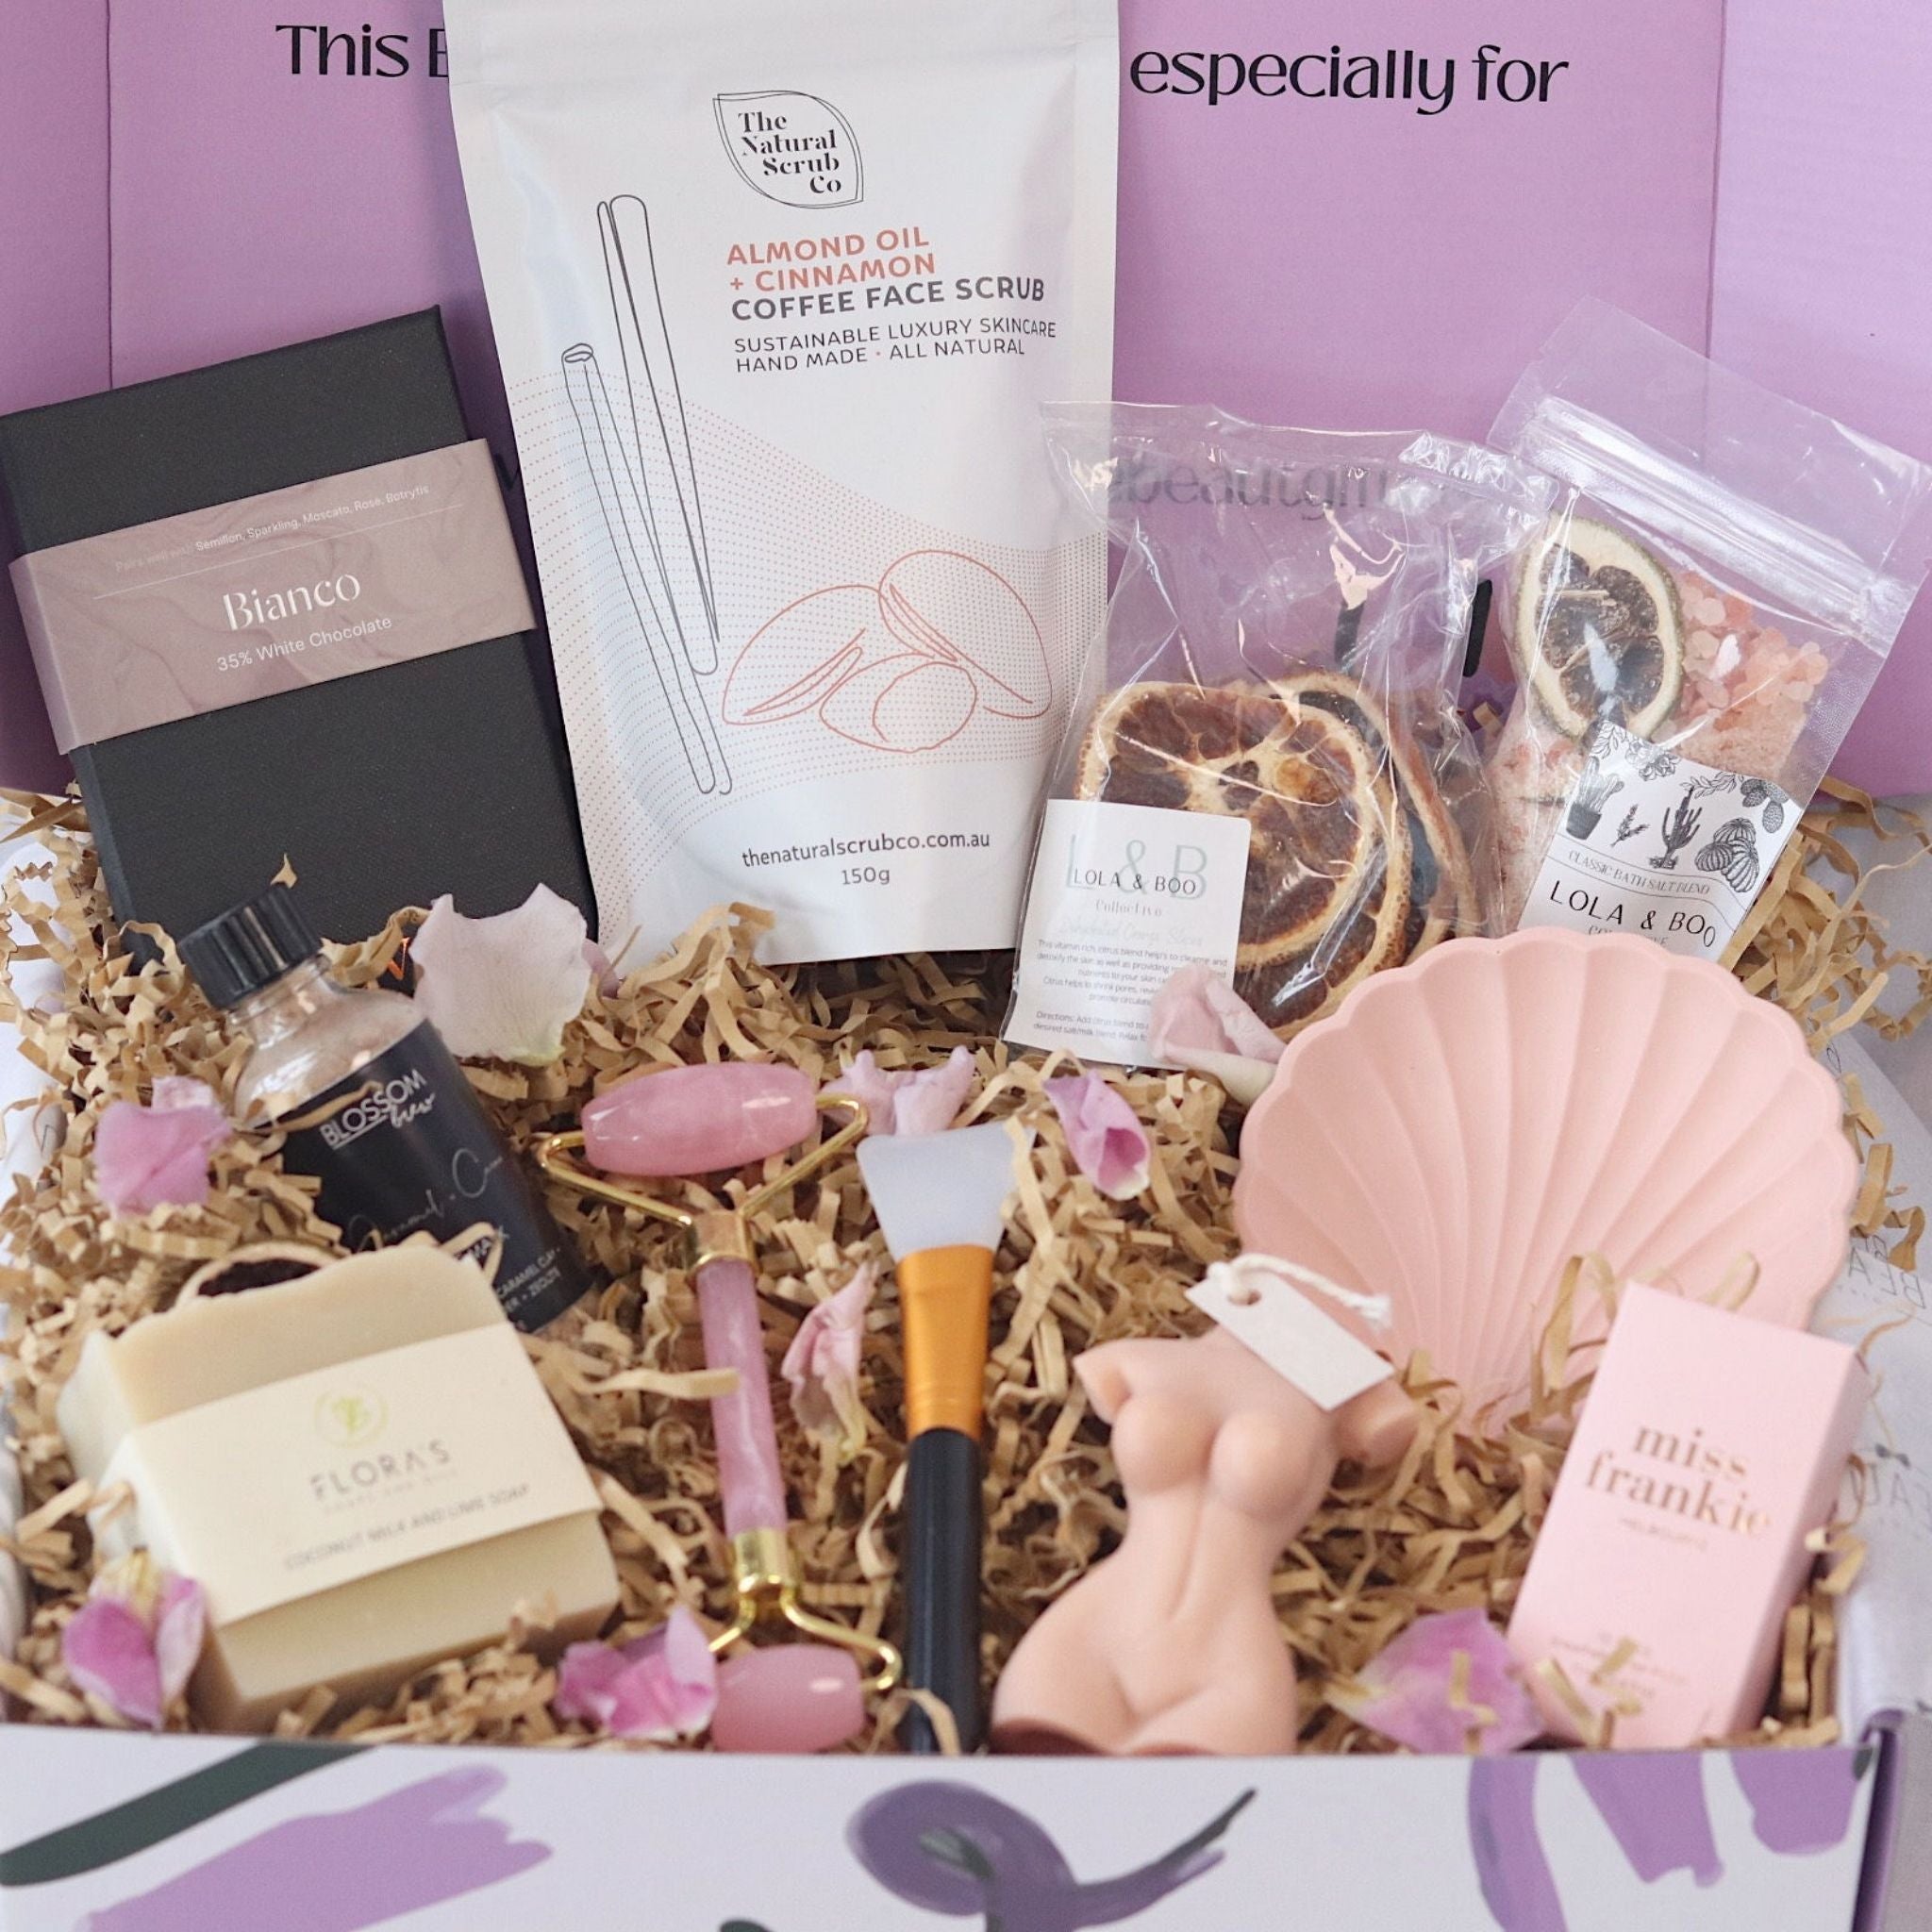 the ultimate gift for women. features all kinds of pamper items and sweet treats